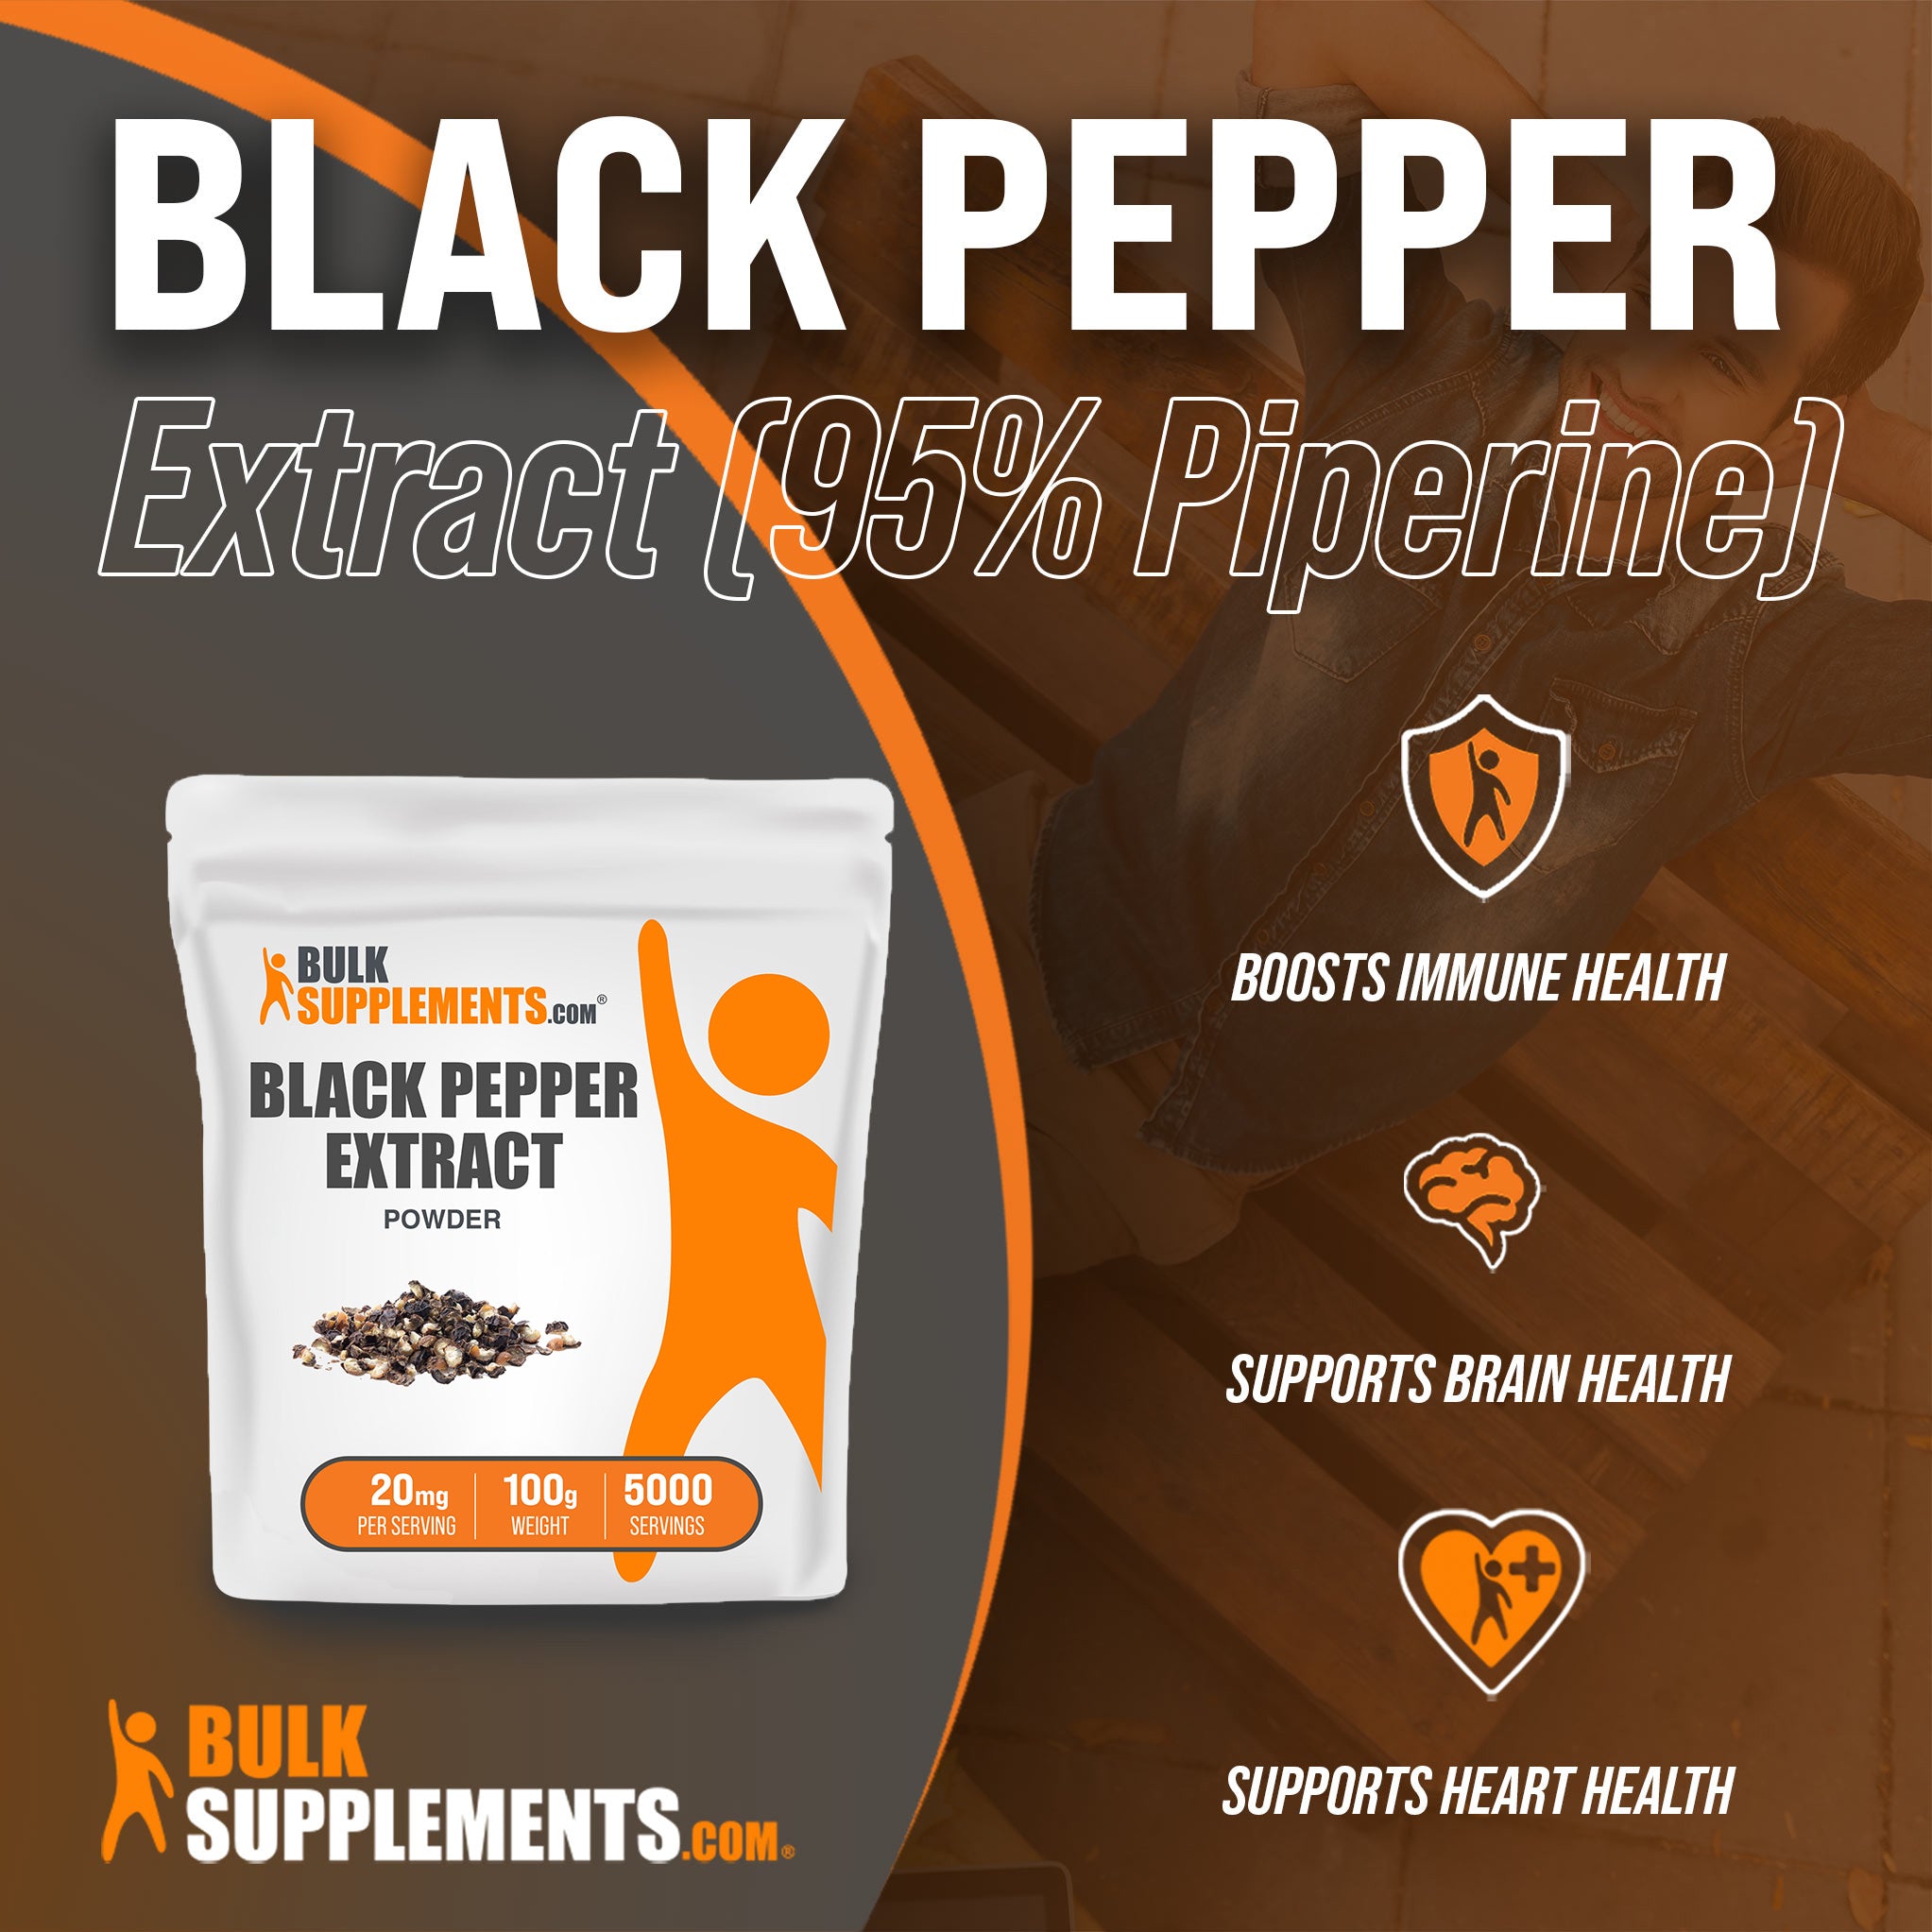 100g bags of black pepper extract are a great source of piperine